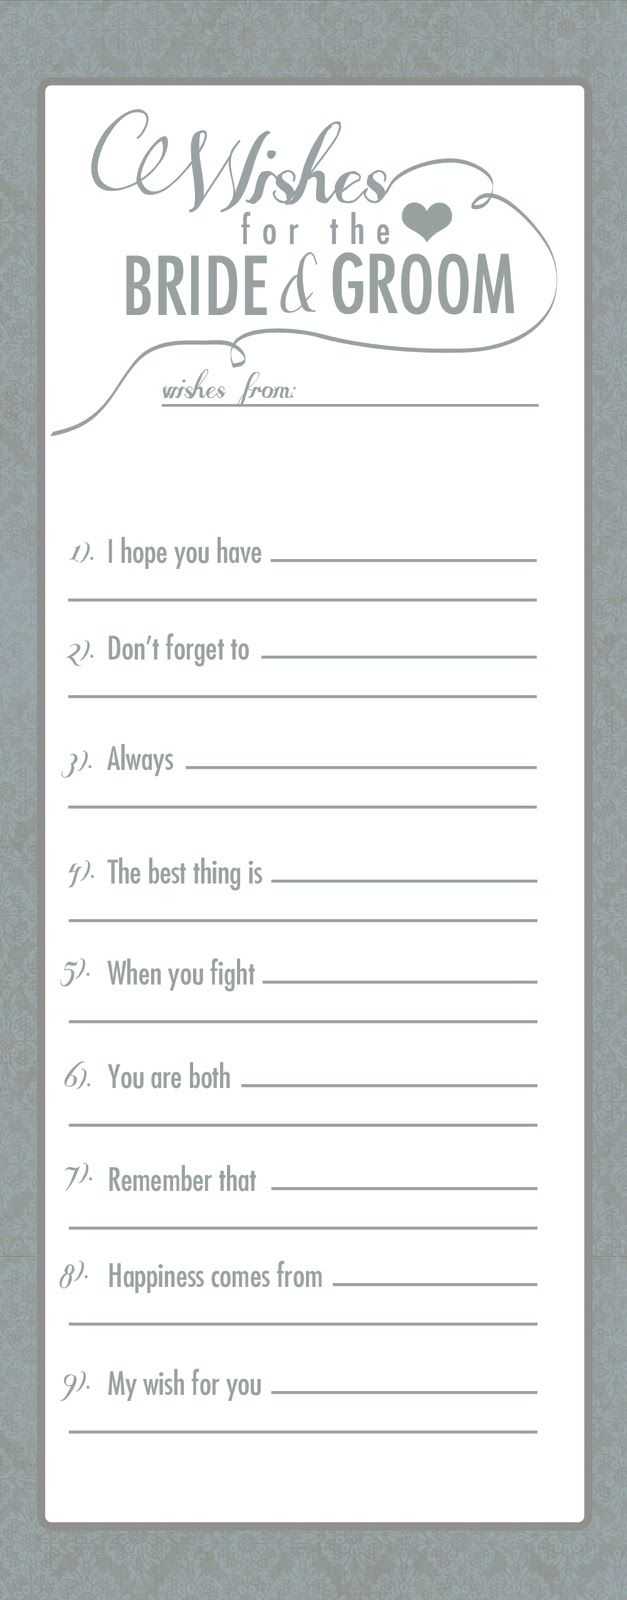 Wedding Stationery Breakdown With Regard To Marriage Advice Cards Templates